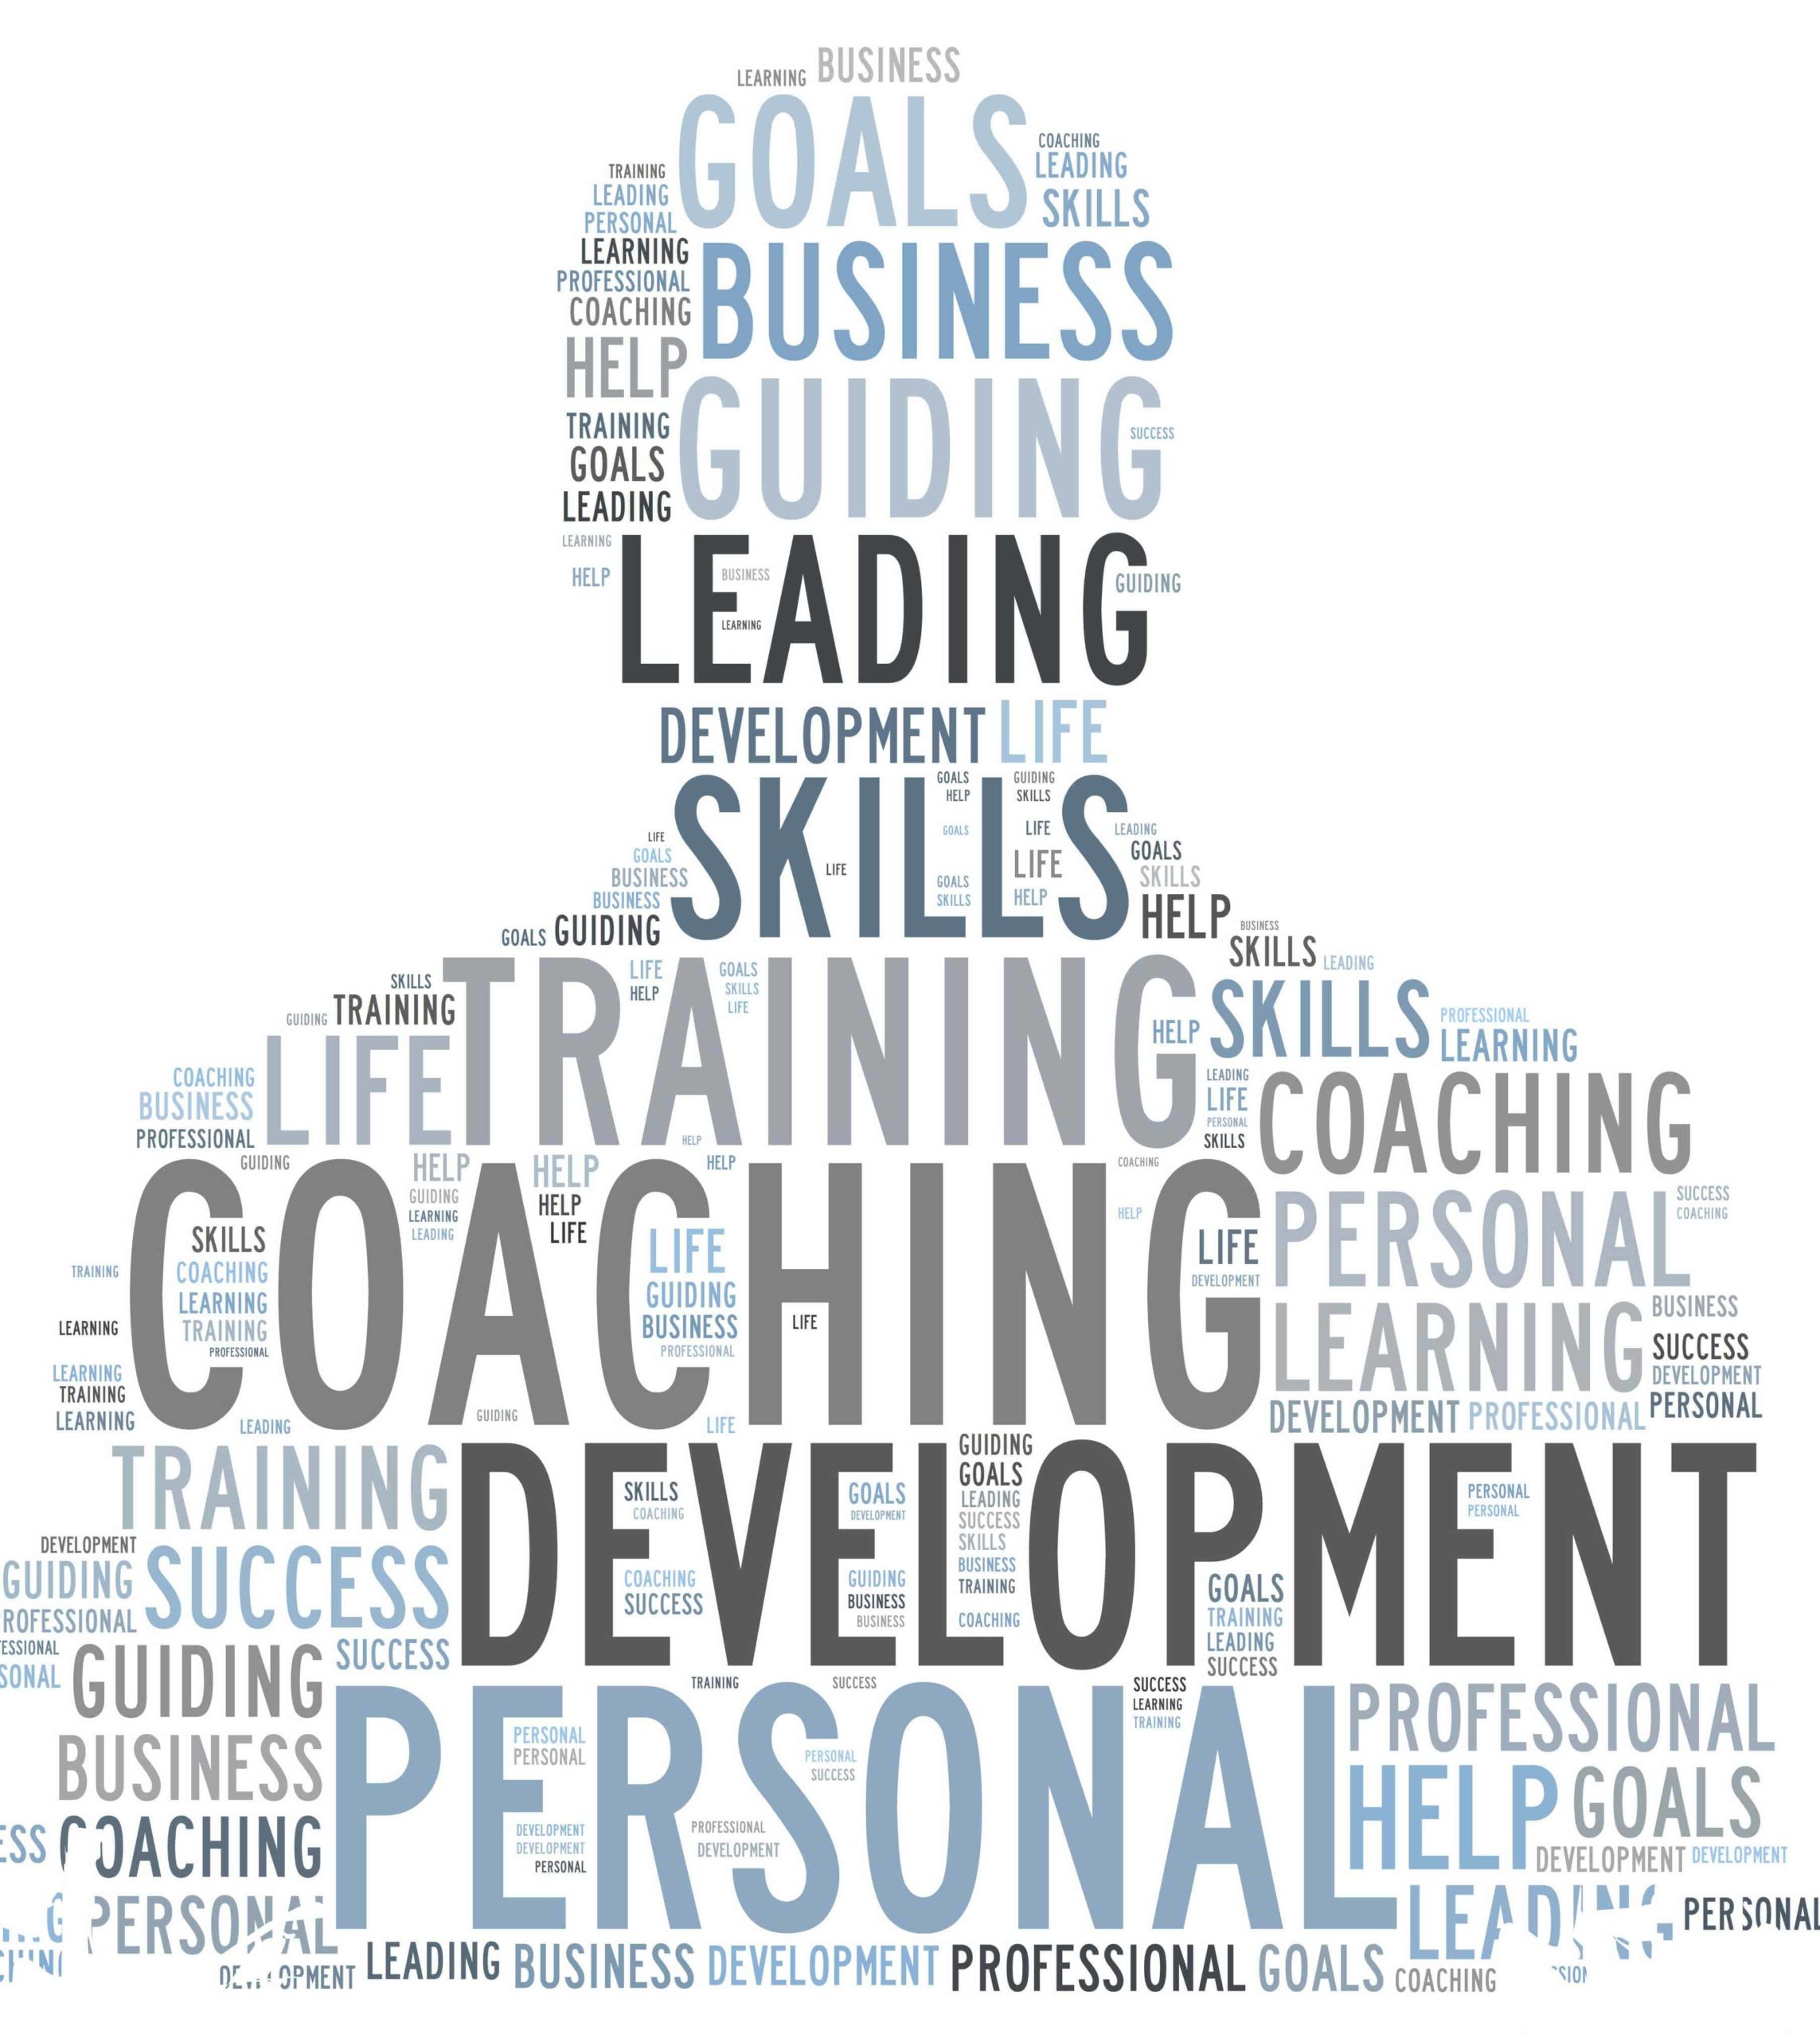 How to Become a Business Coach in 3 Essential Steps